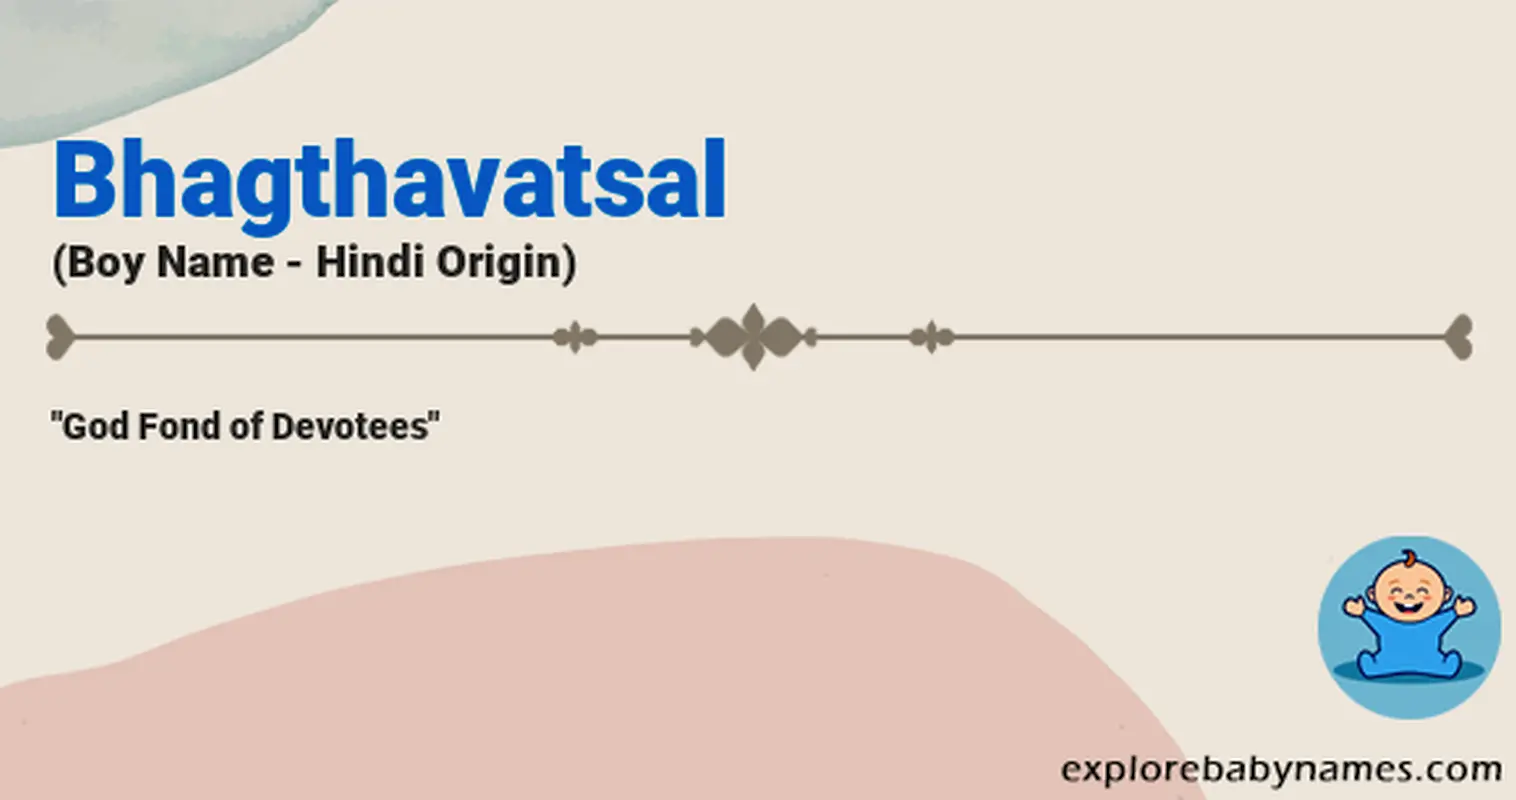 Meaning of Bhagthavatsal